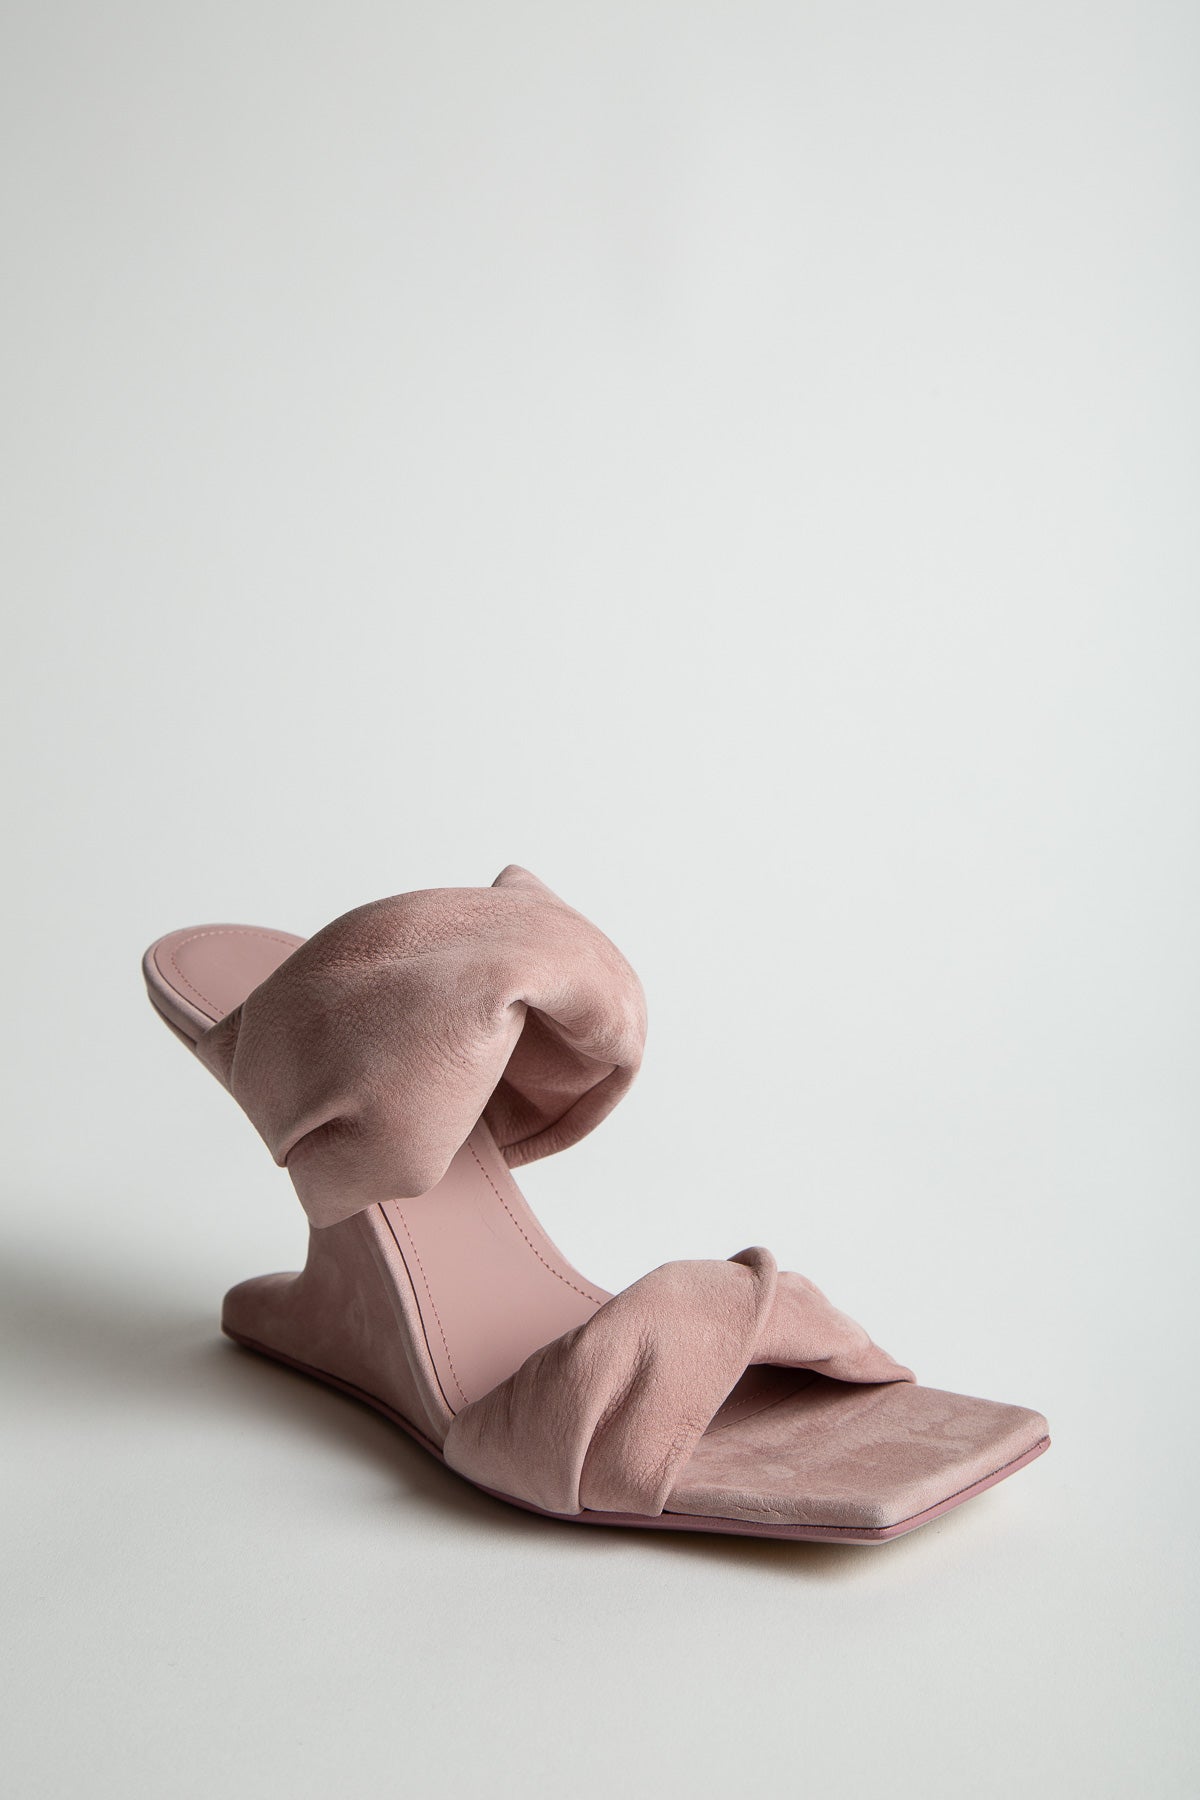 RICK OWENS | CANTILEVER 8 TWISTED SANDALS